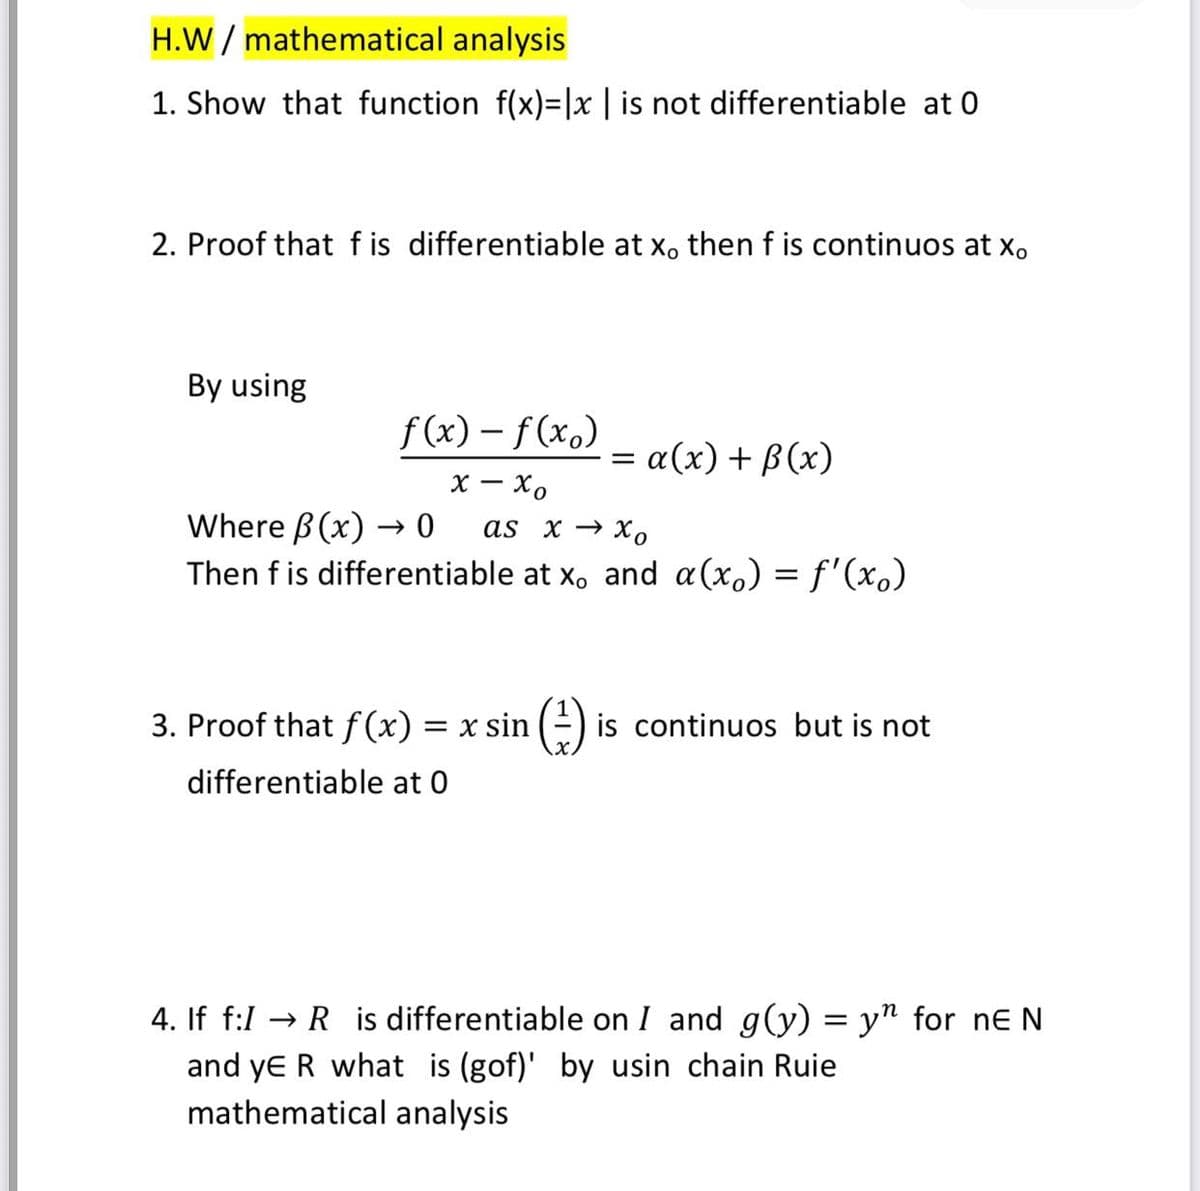 H.W / mathematical analysis
1. Show that function f(x)=|x | is not differentiable at 0
2. Proof that f is differentiable at x, then f is continuos at x.
By using
f (x) – f(x.)
= α(x) + β (x)
х — Хо
Where B (x) → 0
Then f is differentiable at x, and a(x.) = f'(xo)
as x → X,
3. Proof that f (x) = x sin (-) is continuos but is not
differentiable at 0
4. If f:1 → R is differentiable on I and g(y) = y" for ne N
and ye R what is (gof)' by usin chain Ruie
mathematical analysis
